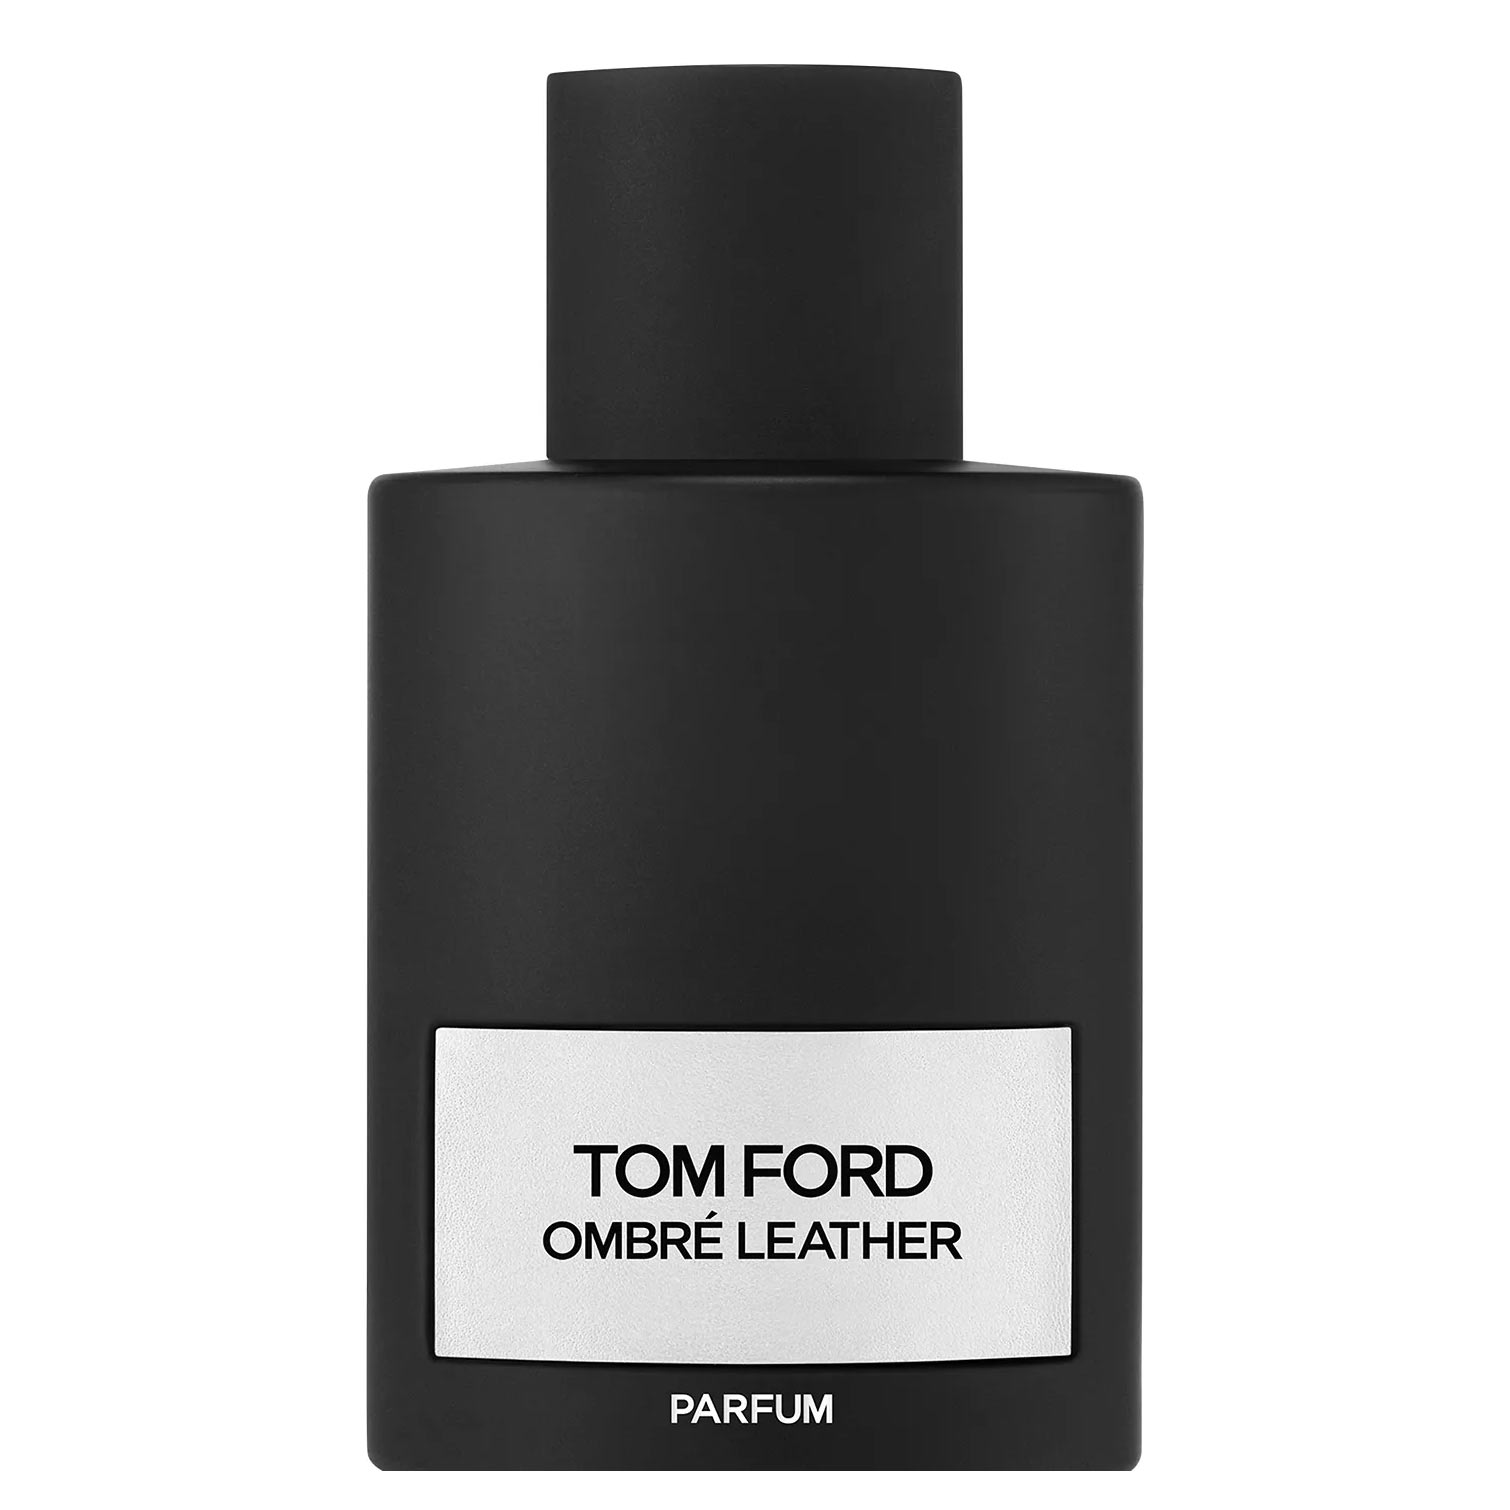 Ombre Leather Parfum Tom Ford Image